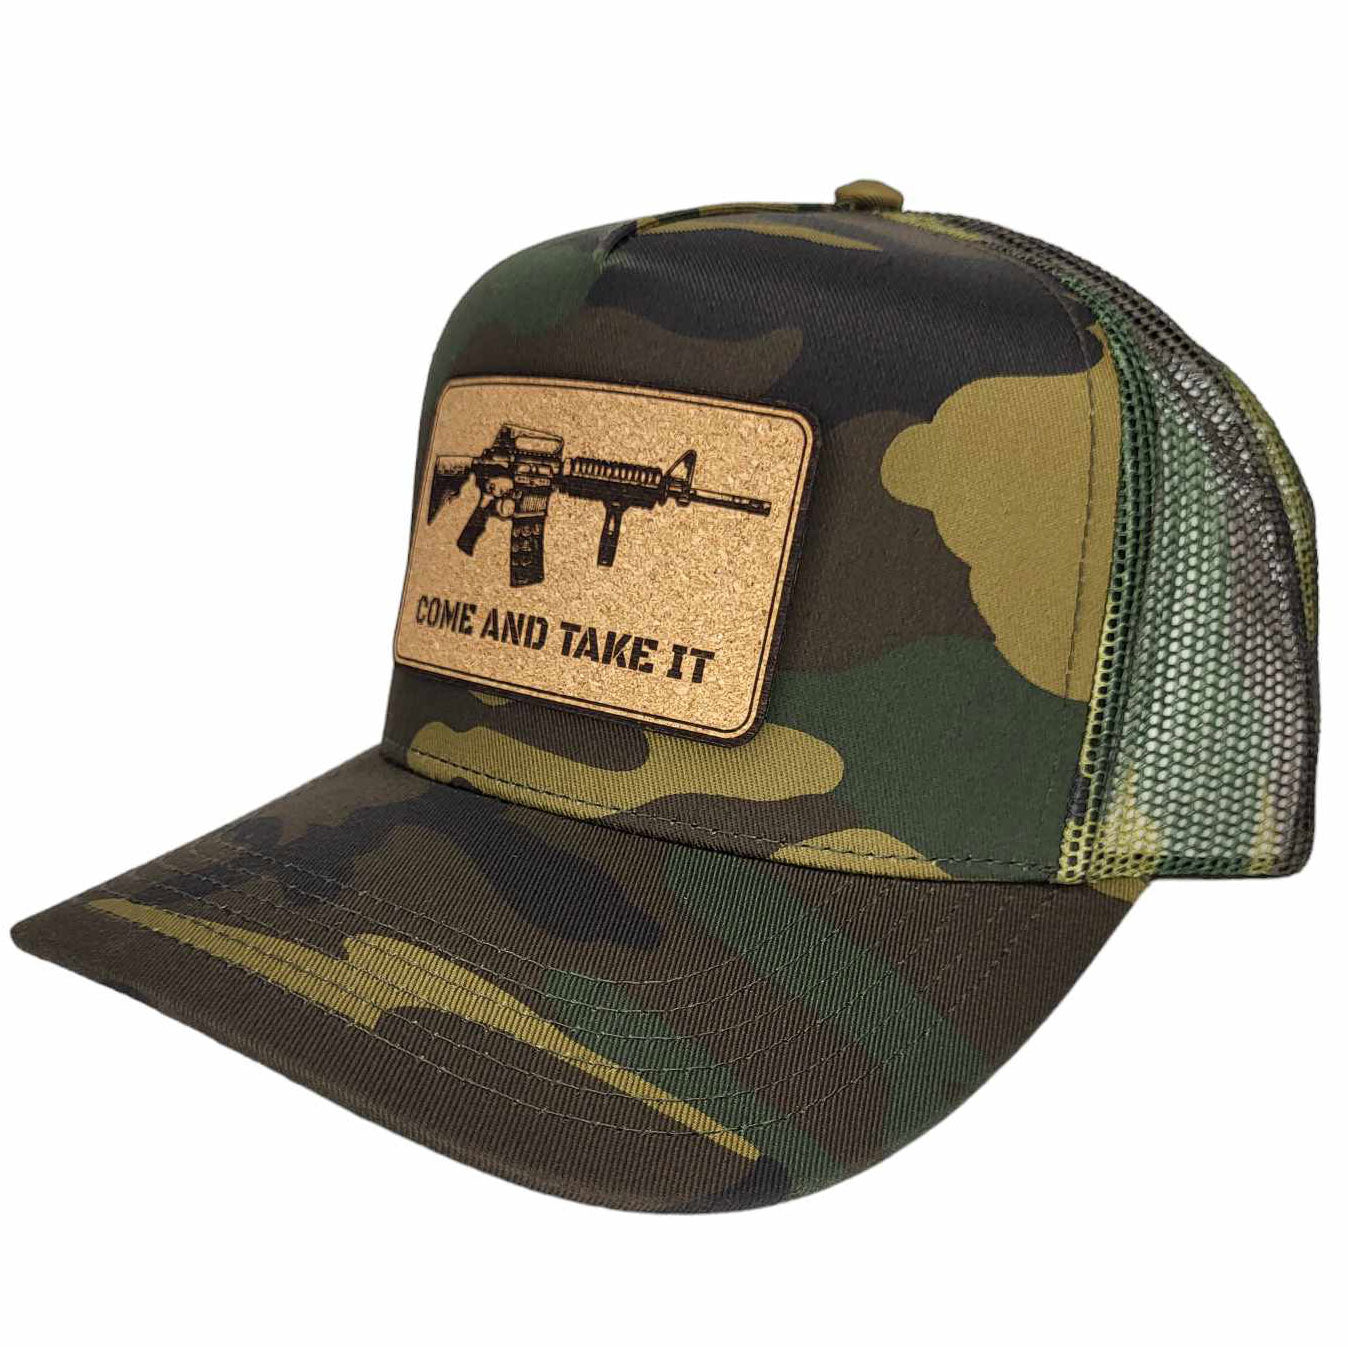 Come And Take It Cork Patch Hat